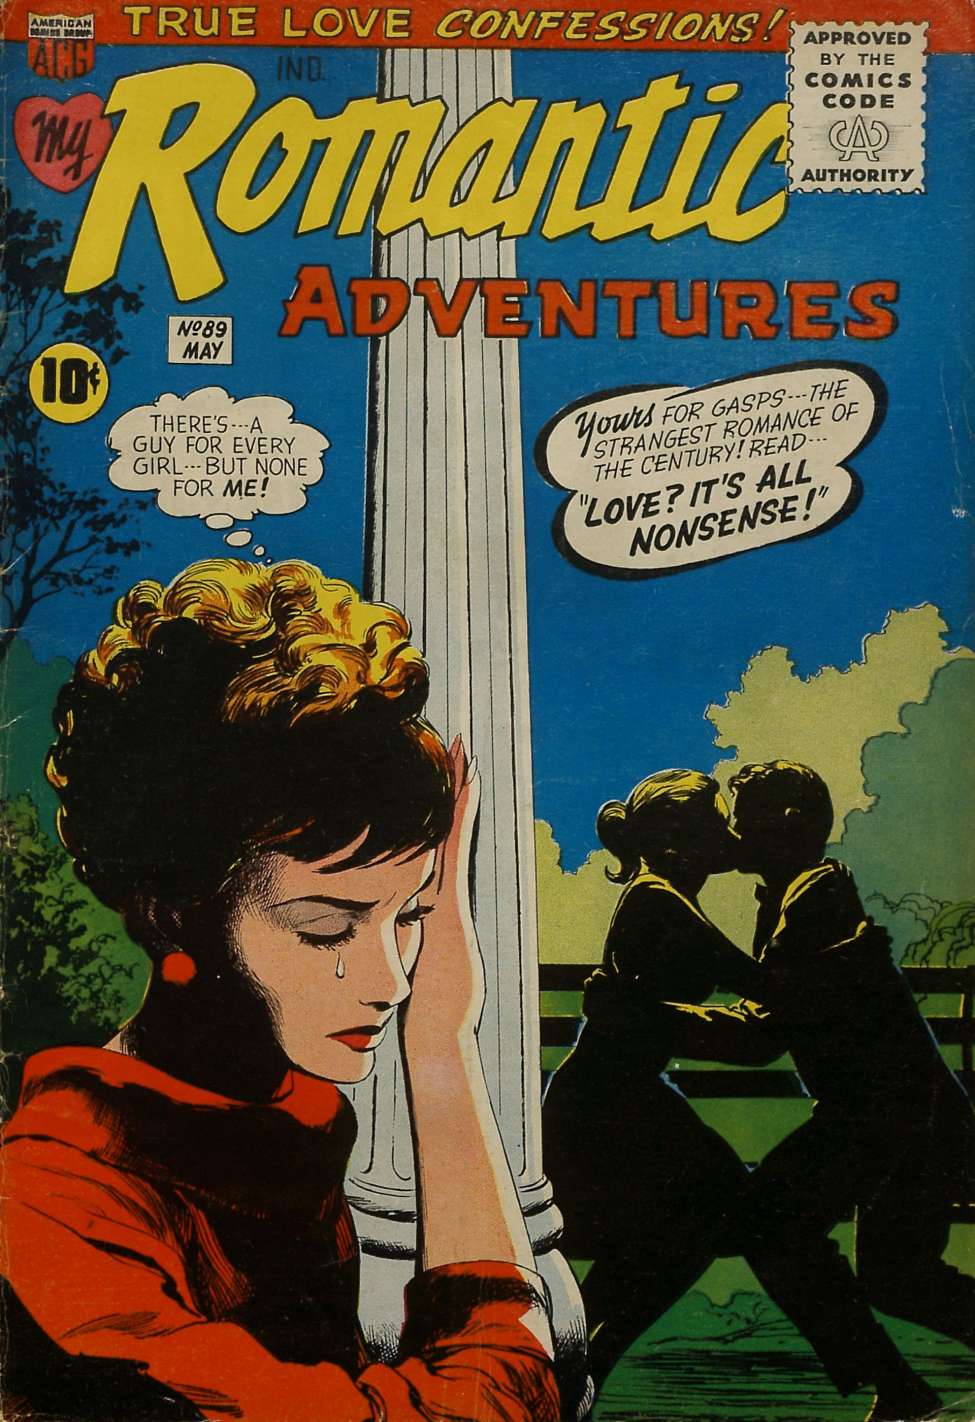 Book Cover For My Romantic Adventures 89